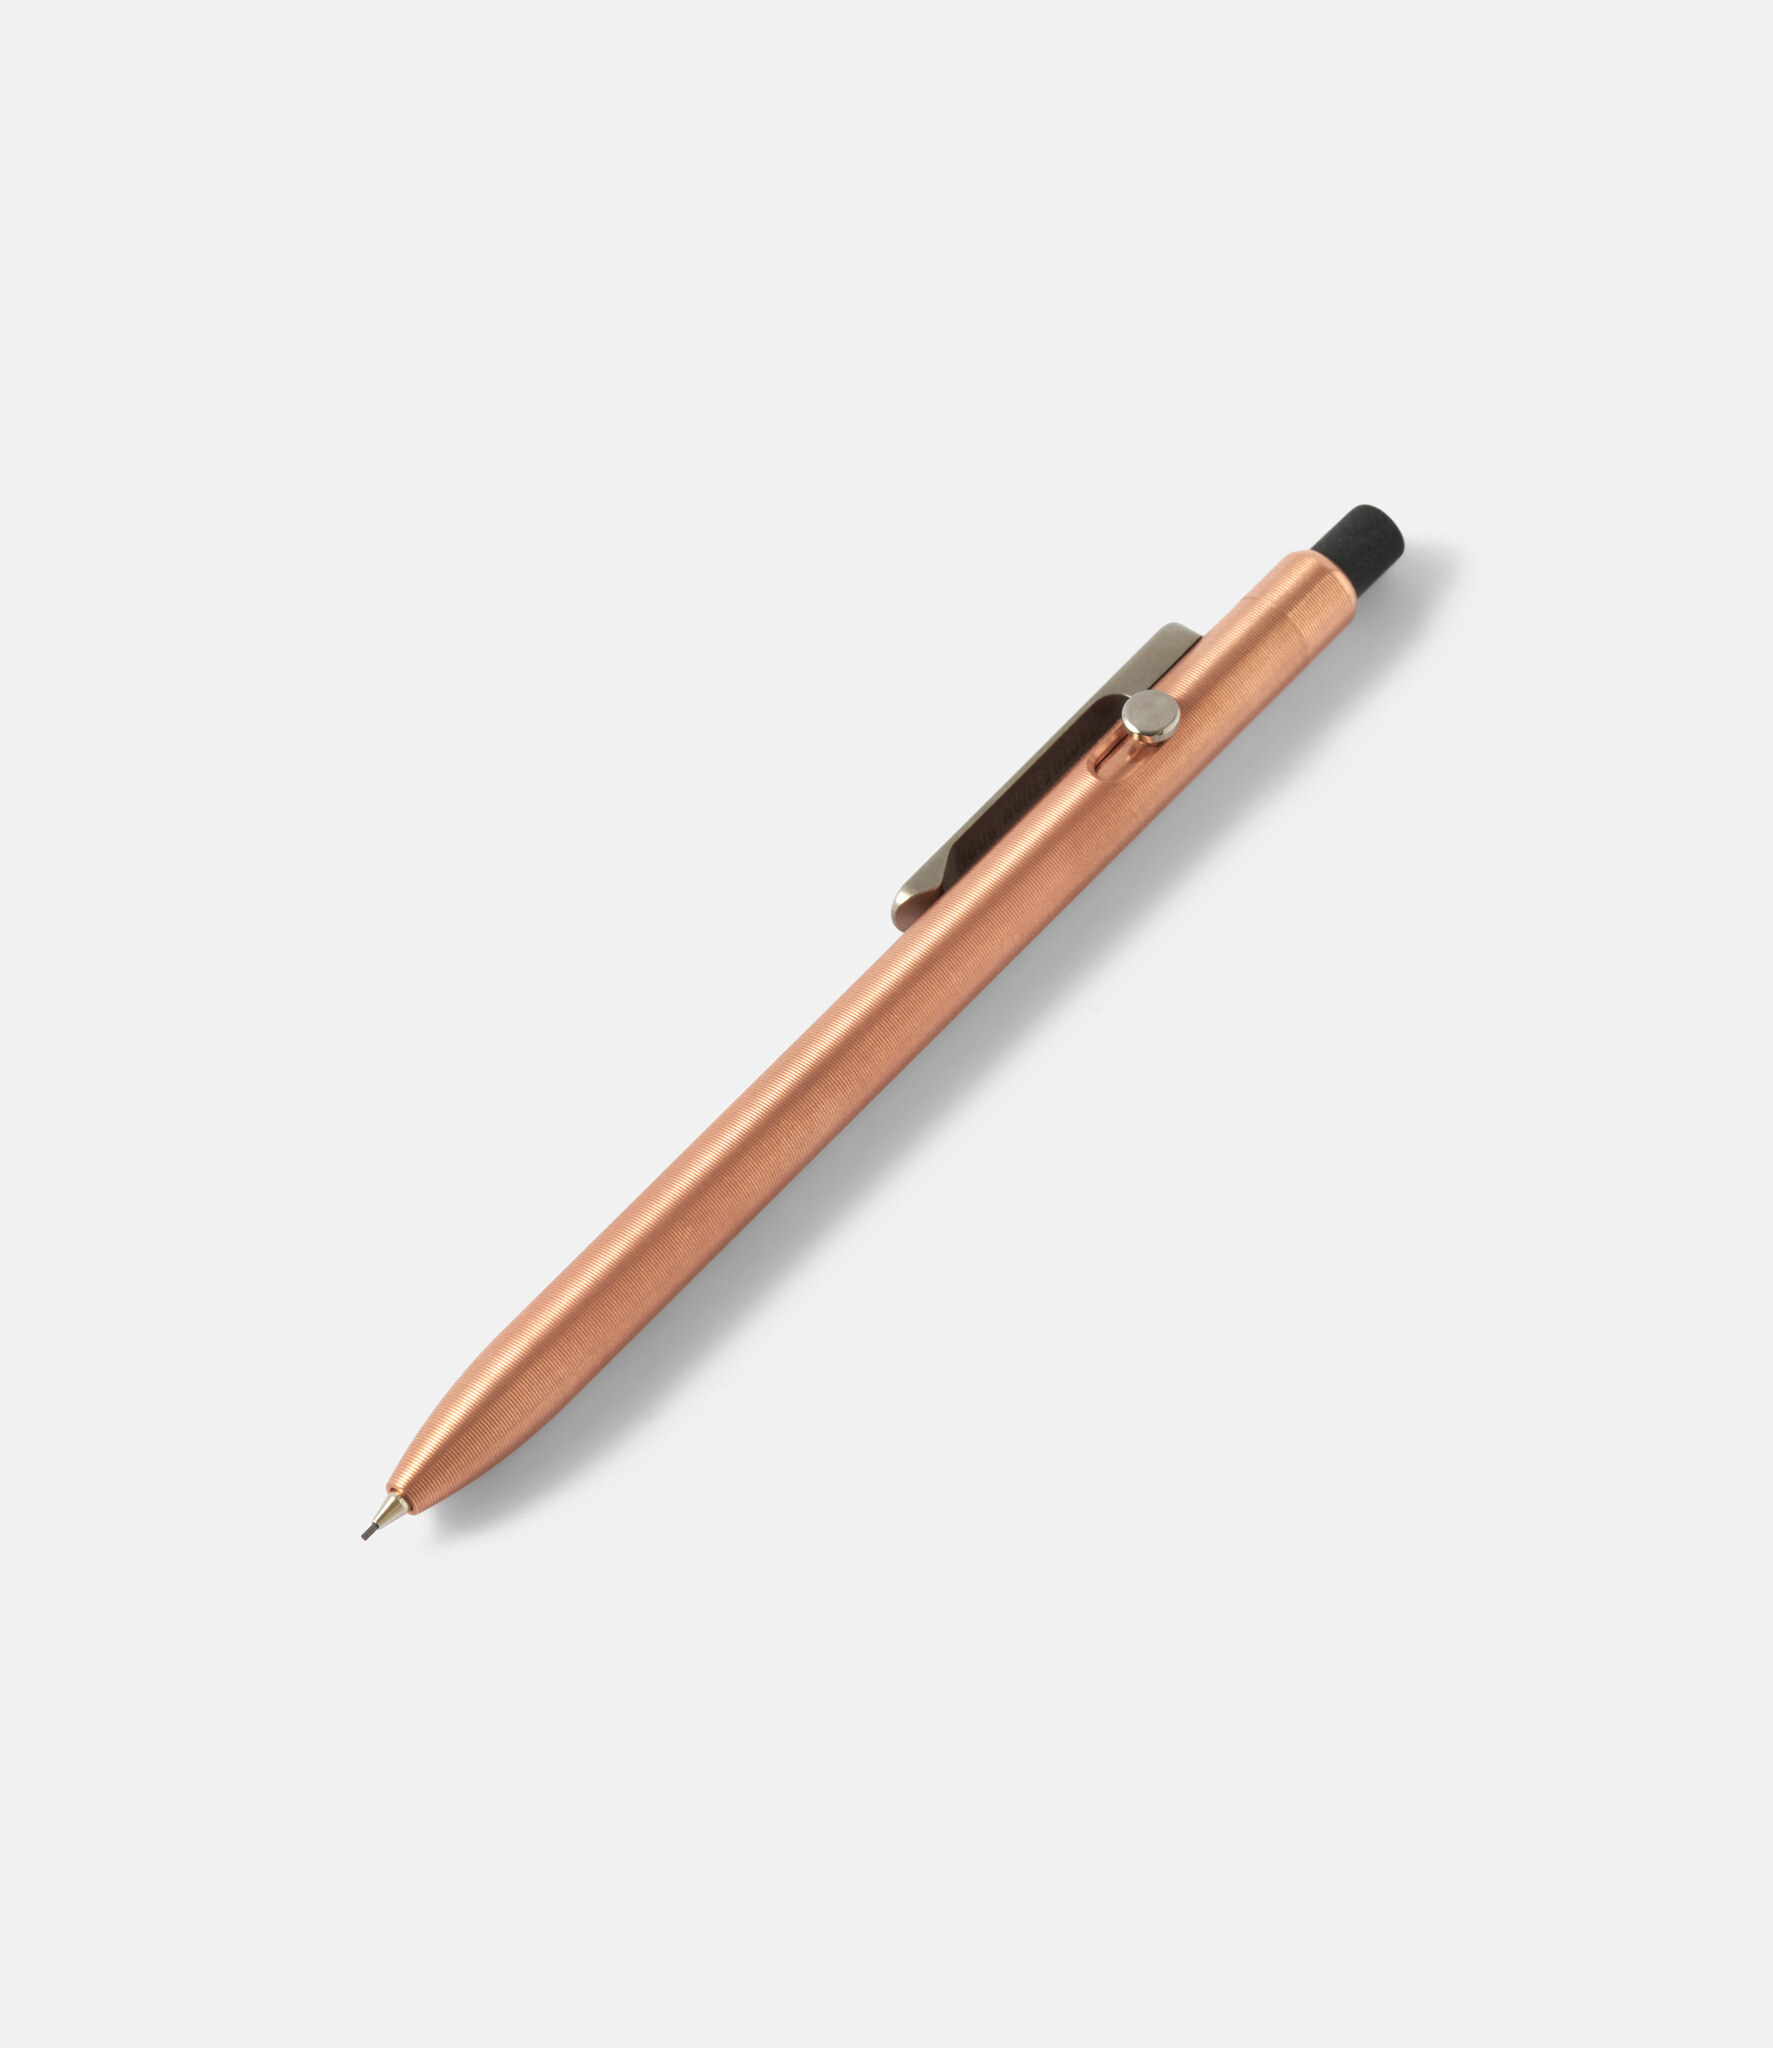 Tactile Turn Pencil Copper — карандаш из меди